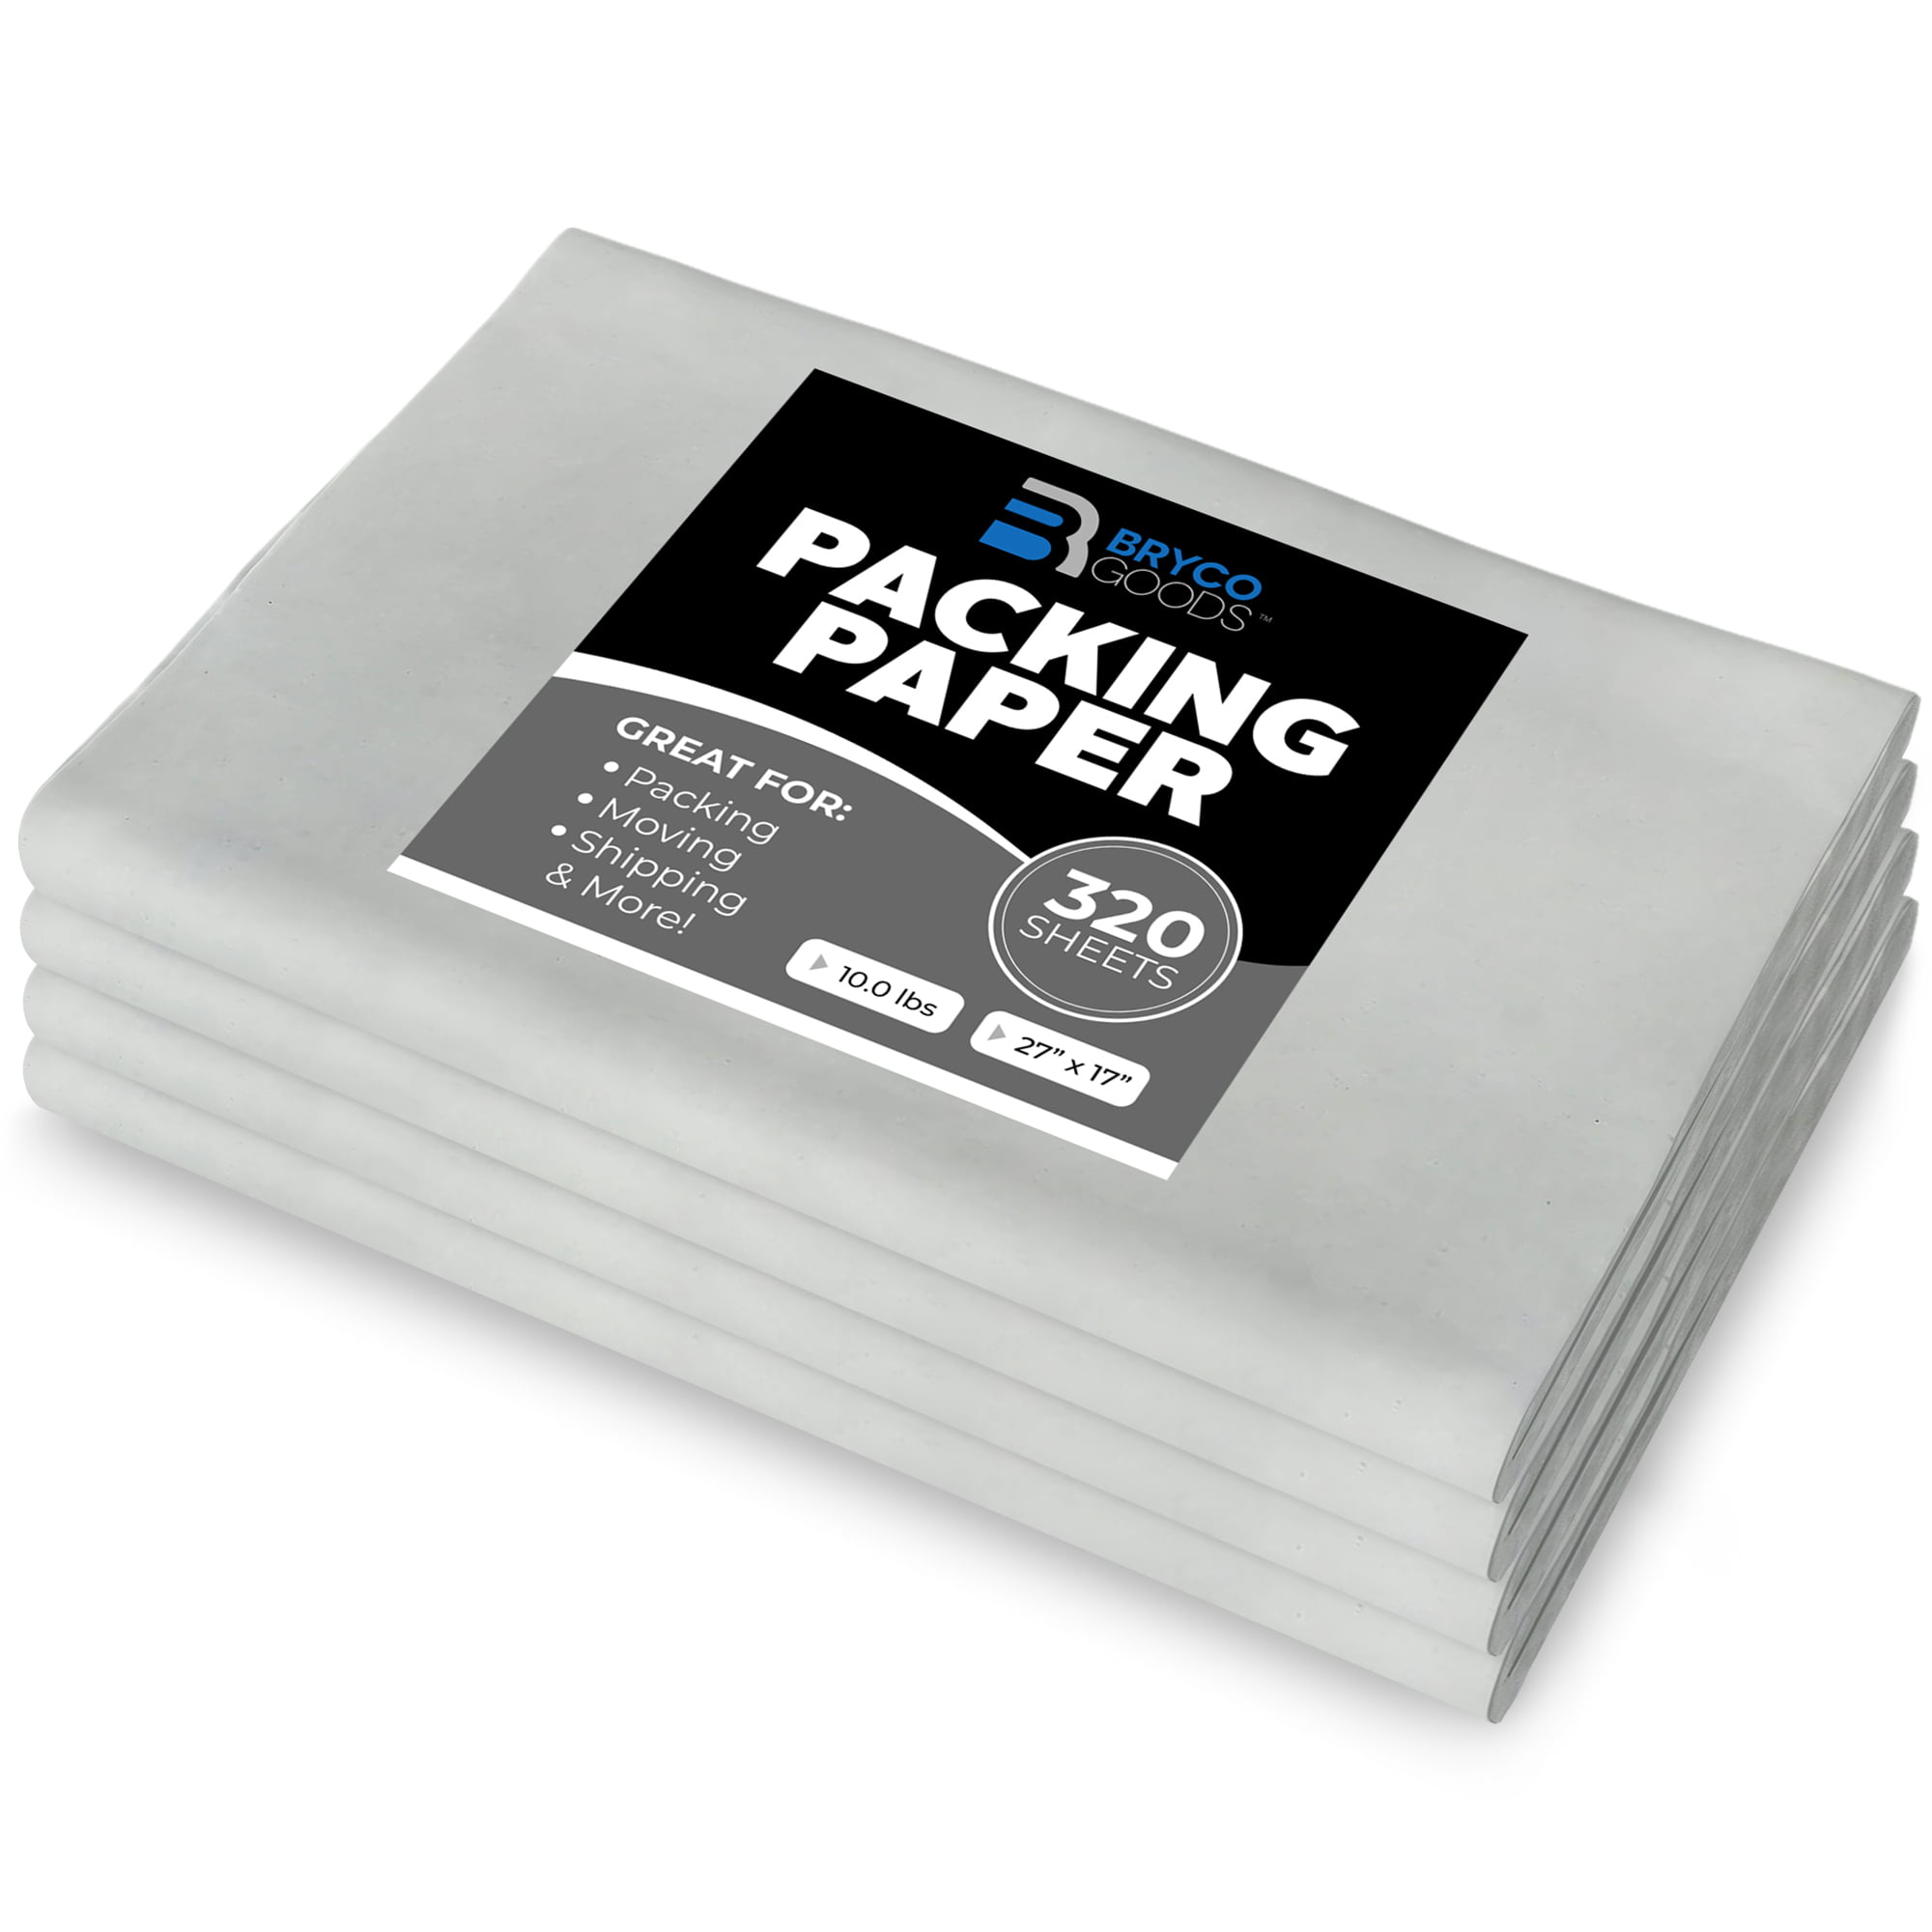 70 Sheets Newsprint Packing Paper Sheets for Moving, Shipping, Box Filler,  Wrapping and Protecting Fragile Items 1.8 Lbs (26” x 15”)